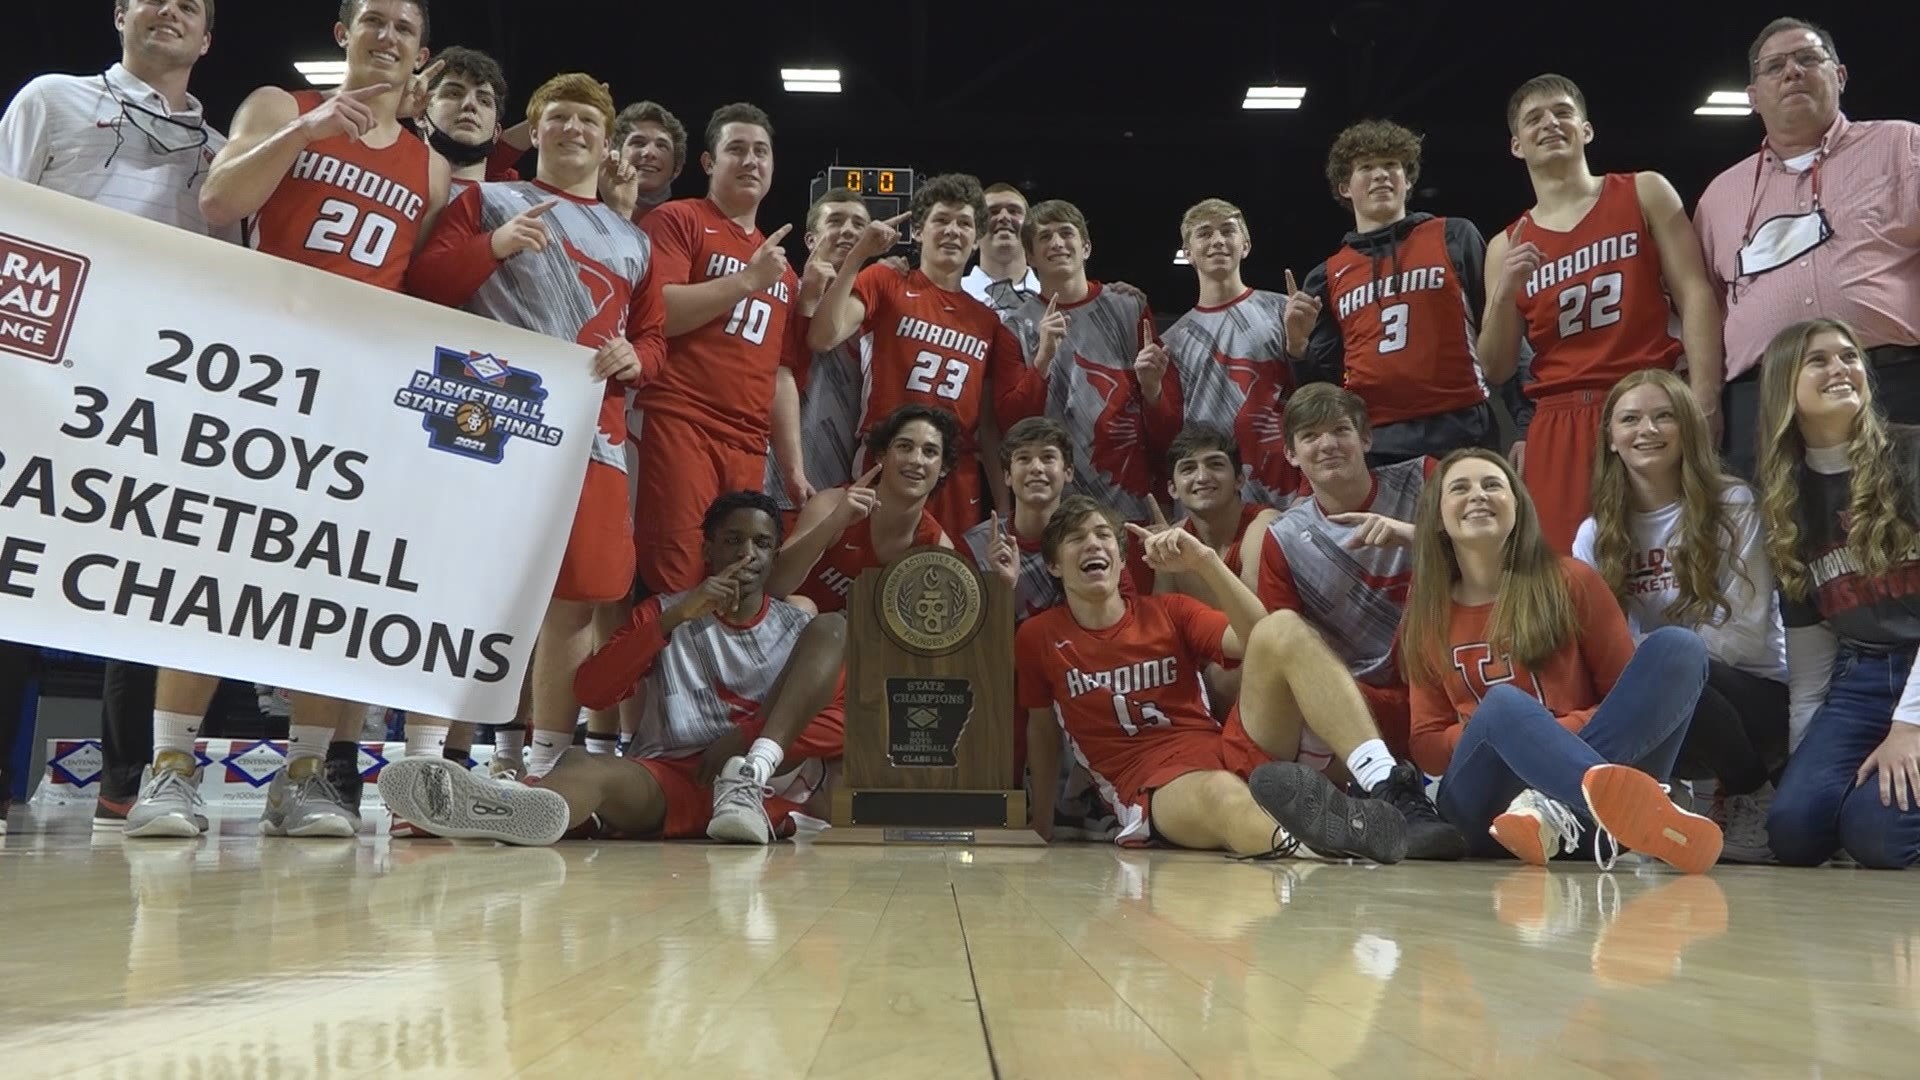 Late run leads Harding Academy to 3A boys title